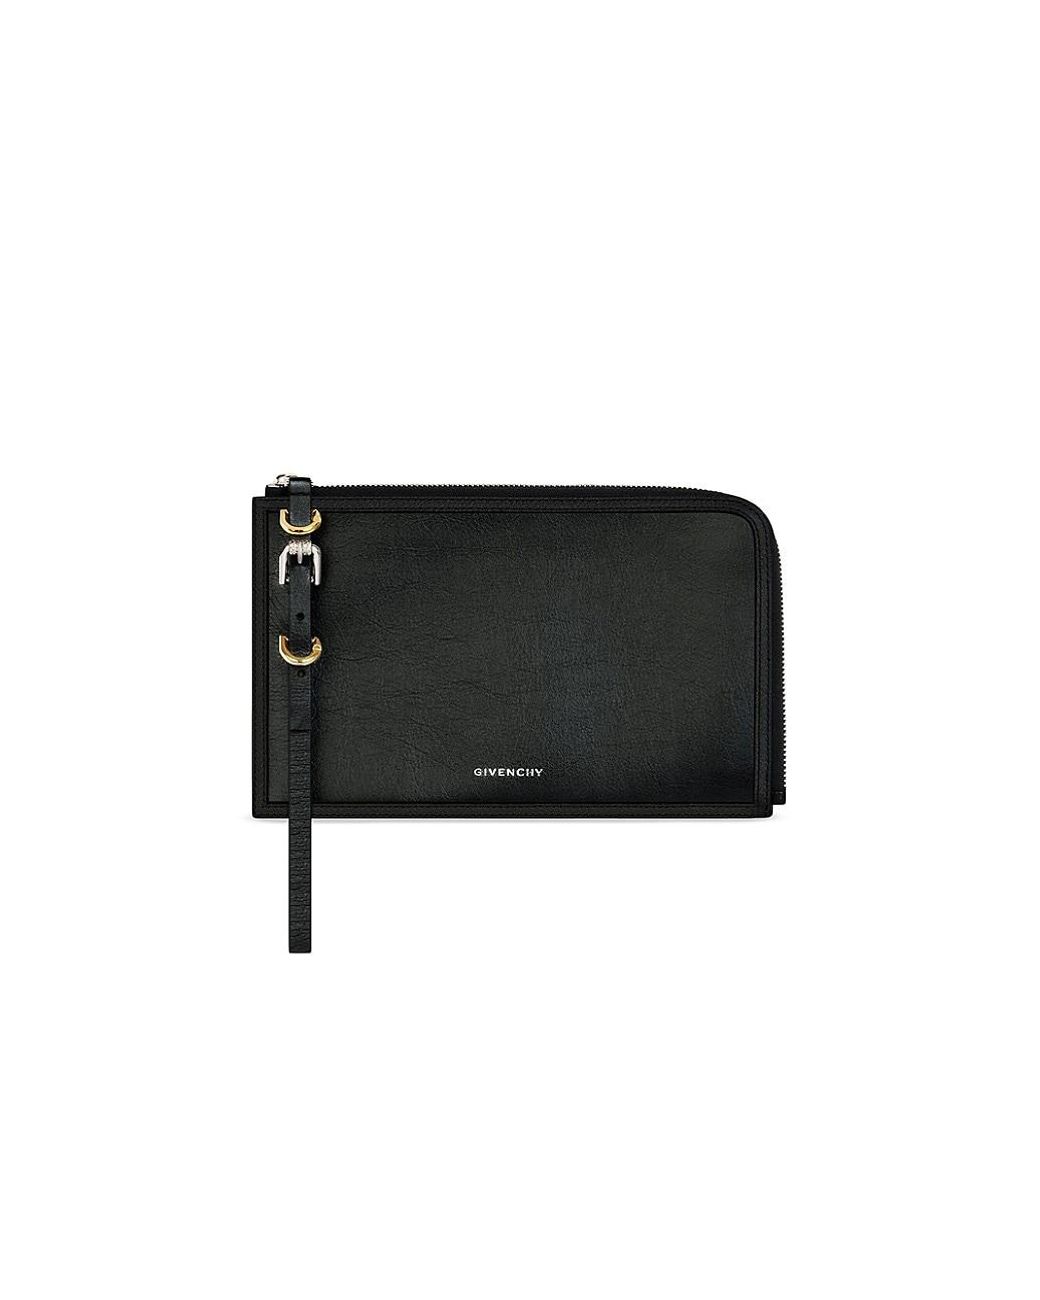 Givenchy Voyou Pouch In Leather in Black | Lyst